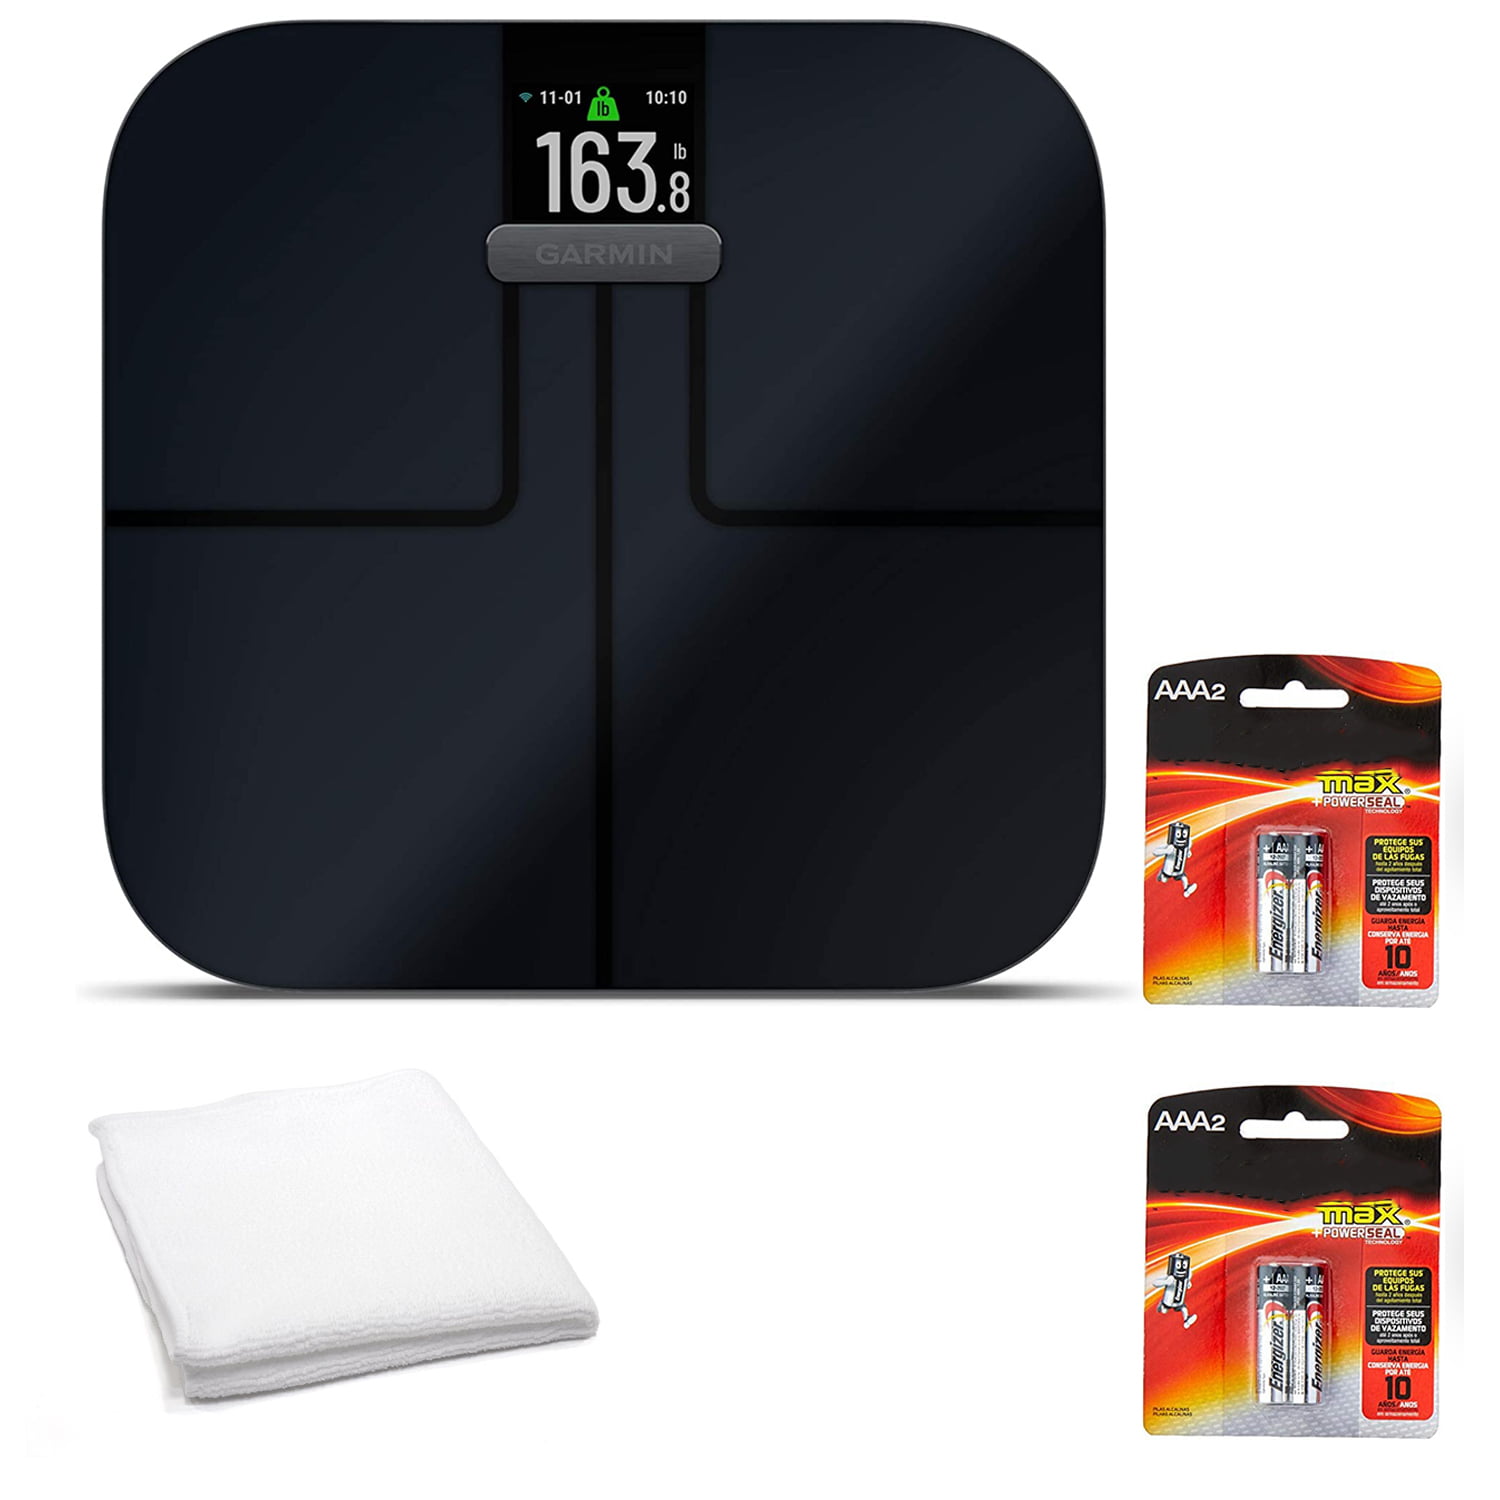 Garmin Index S2, Scale with Wireless Connectivity, Measure Body Fat, Muscle, Bone Mass, Body Water and More-Black (Bundle) - Walmart.com